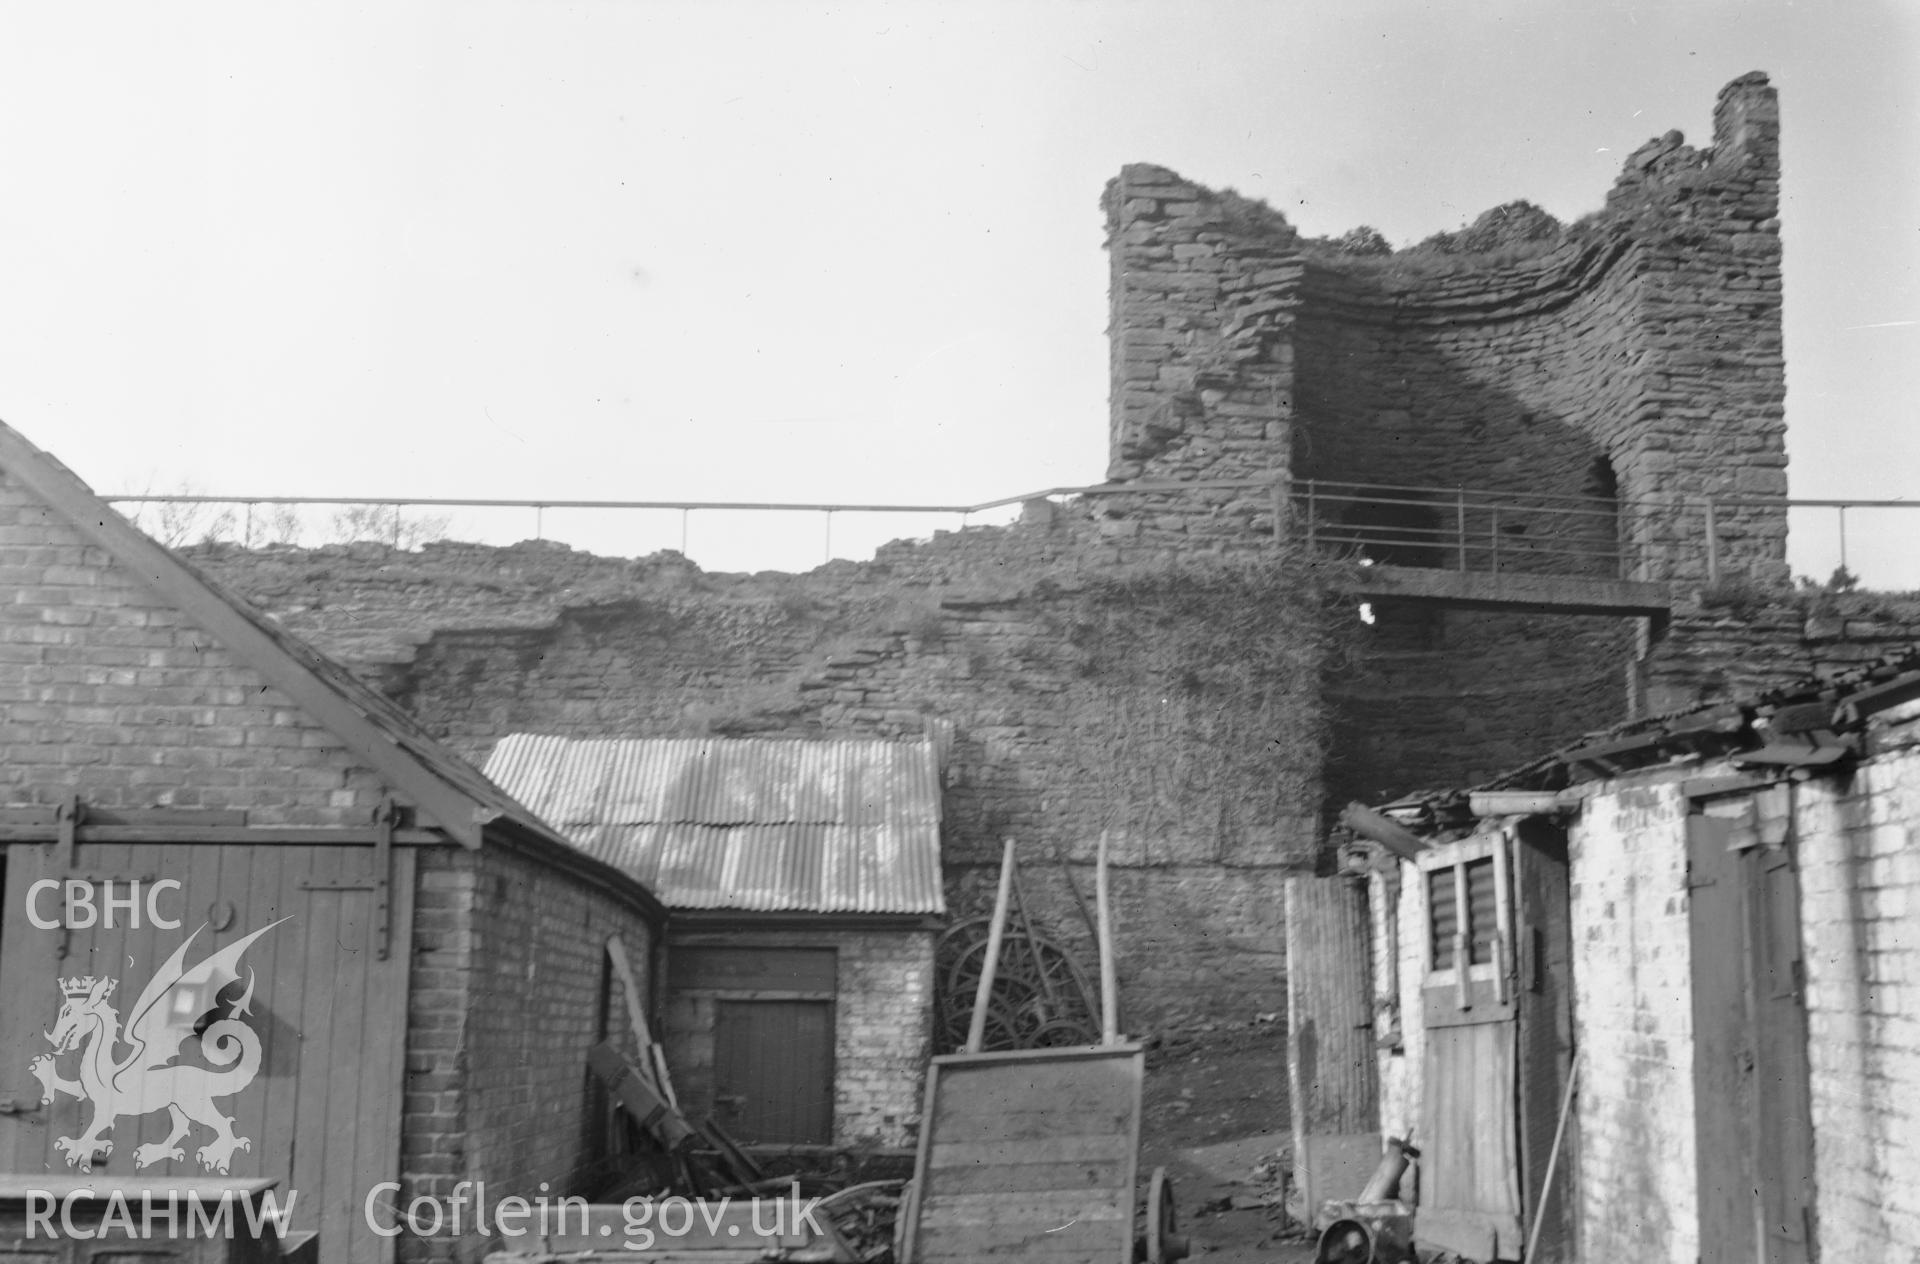 View of outbuildings built on Conwy town walls, taken in 11.01.1952.